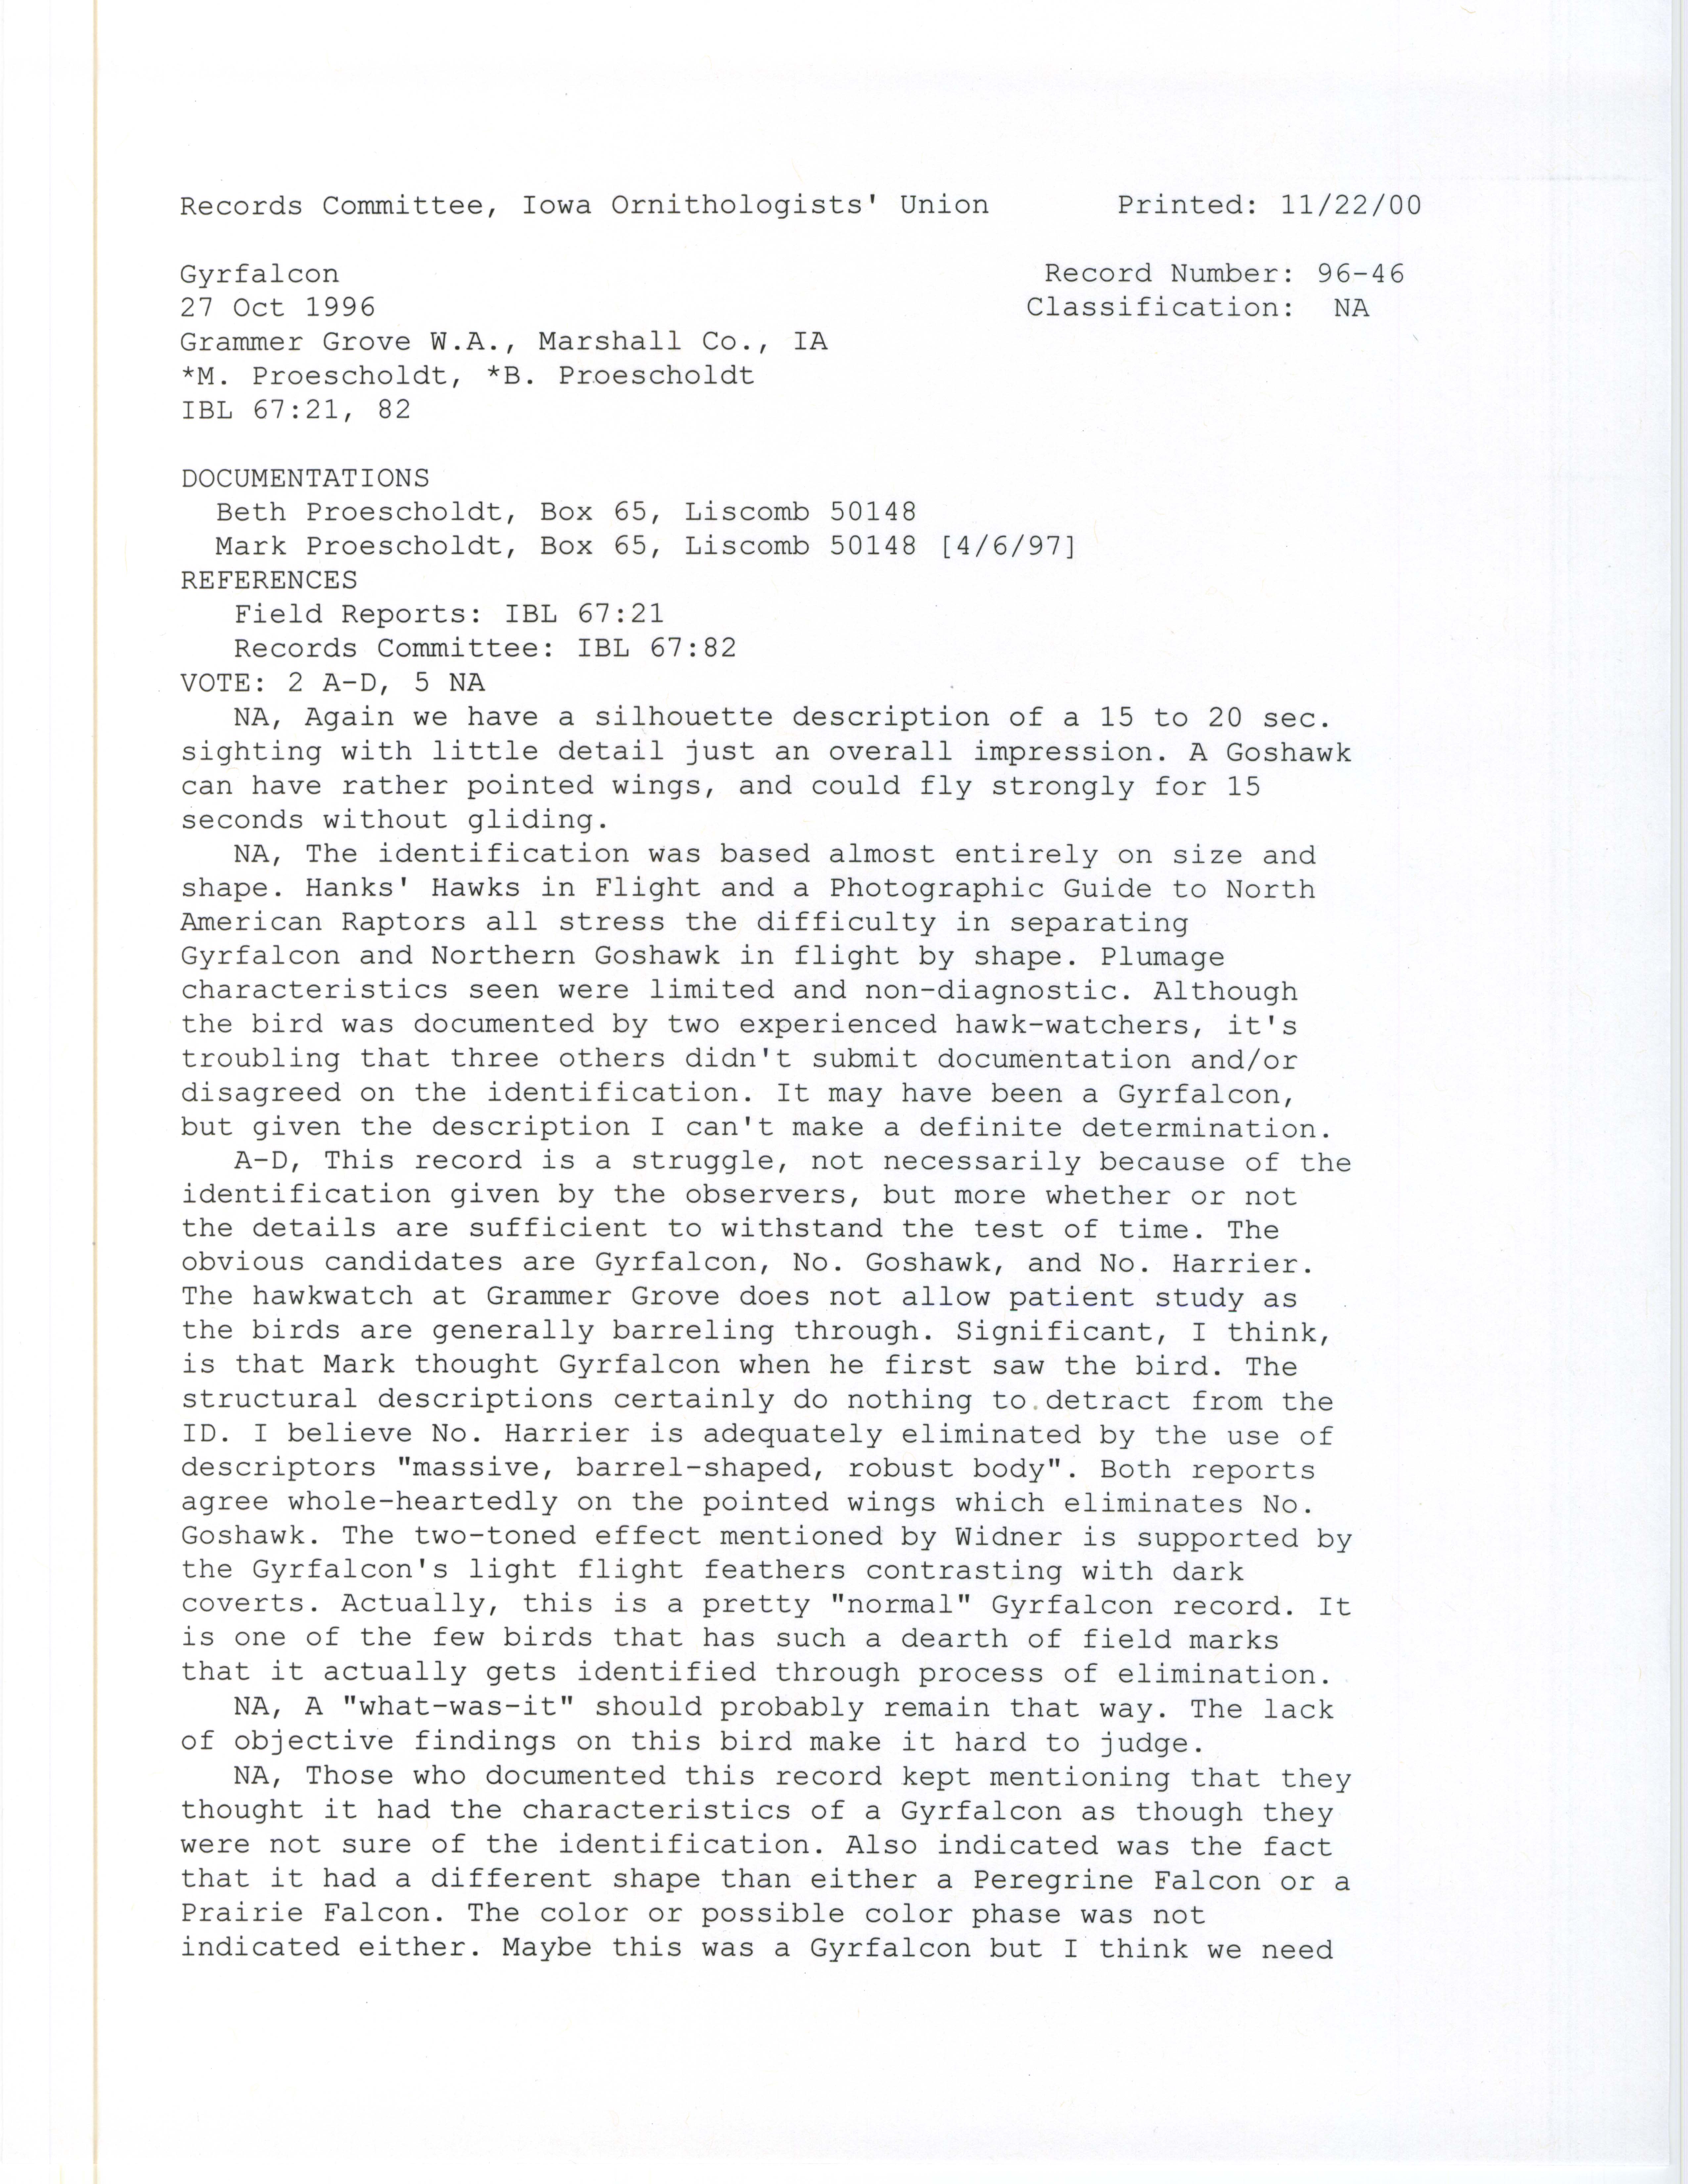 Records Committee review for rare bird sighting of Gyrfalcon at Grammer Grove Wildlife Area, 1996